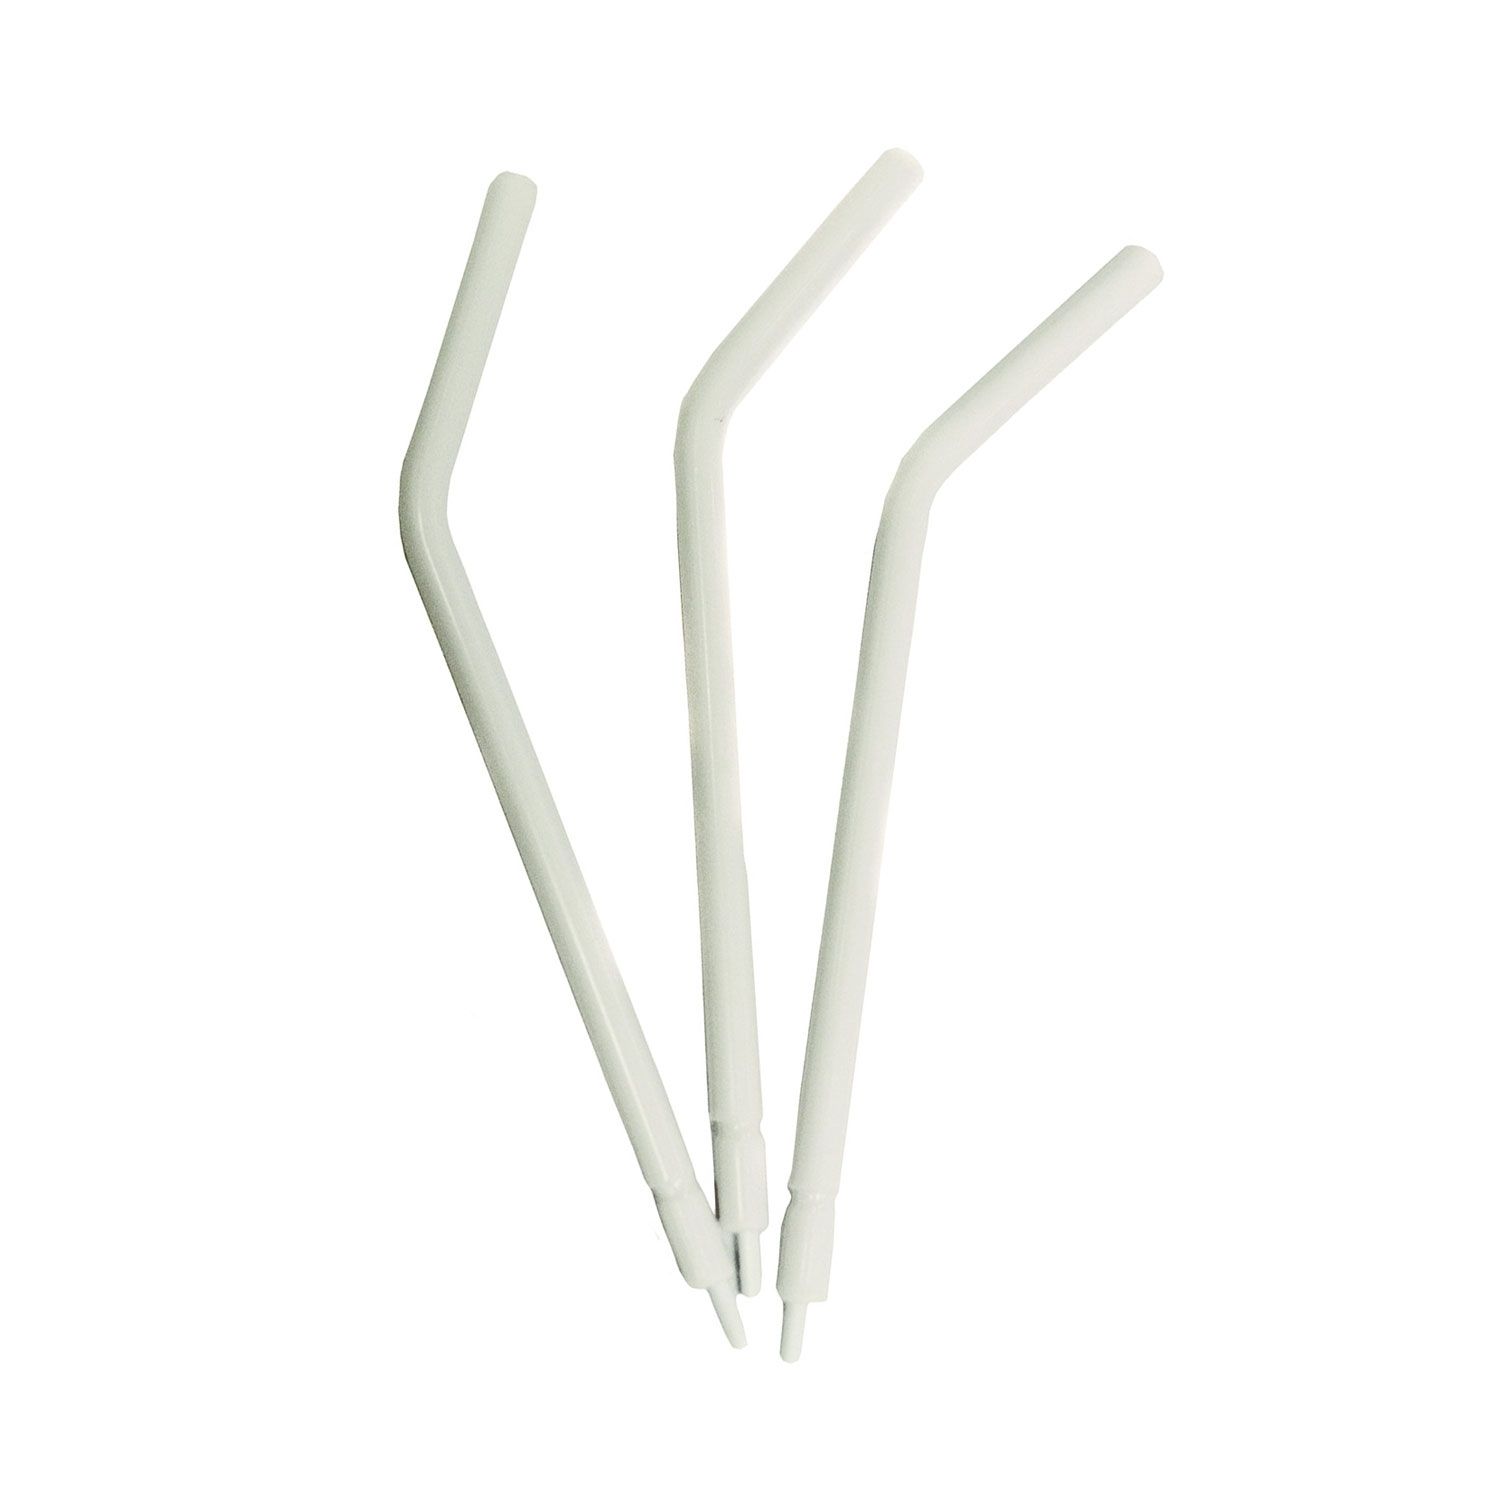 Verify+ 3 in 1 Disposable Air/Water Syringe Tips - White (250)